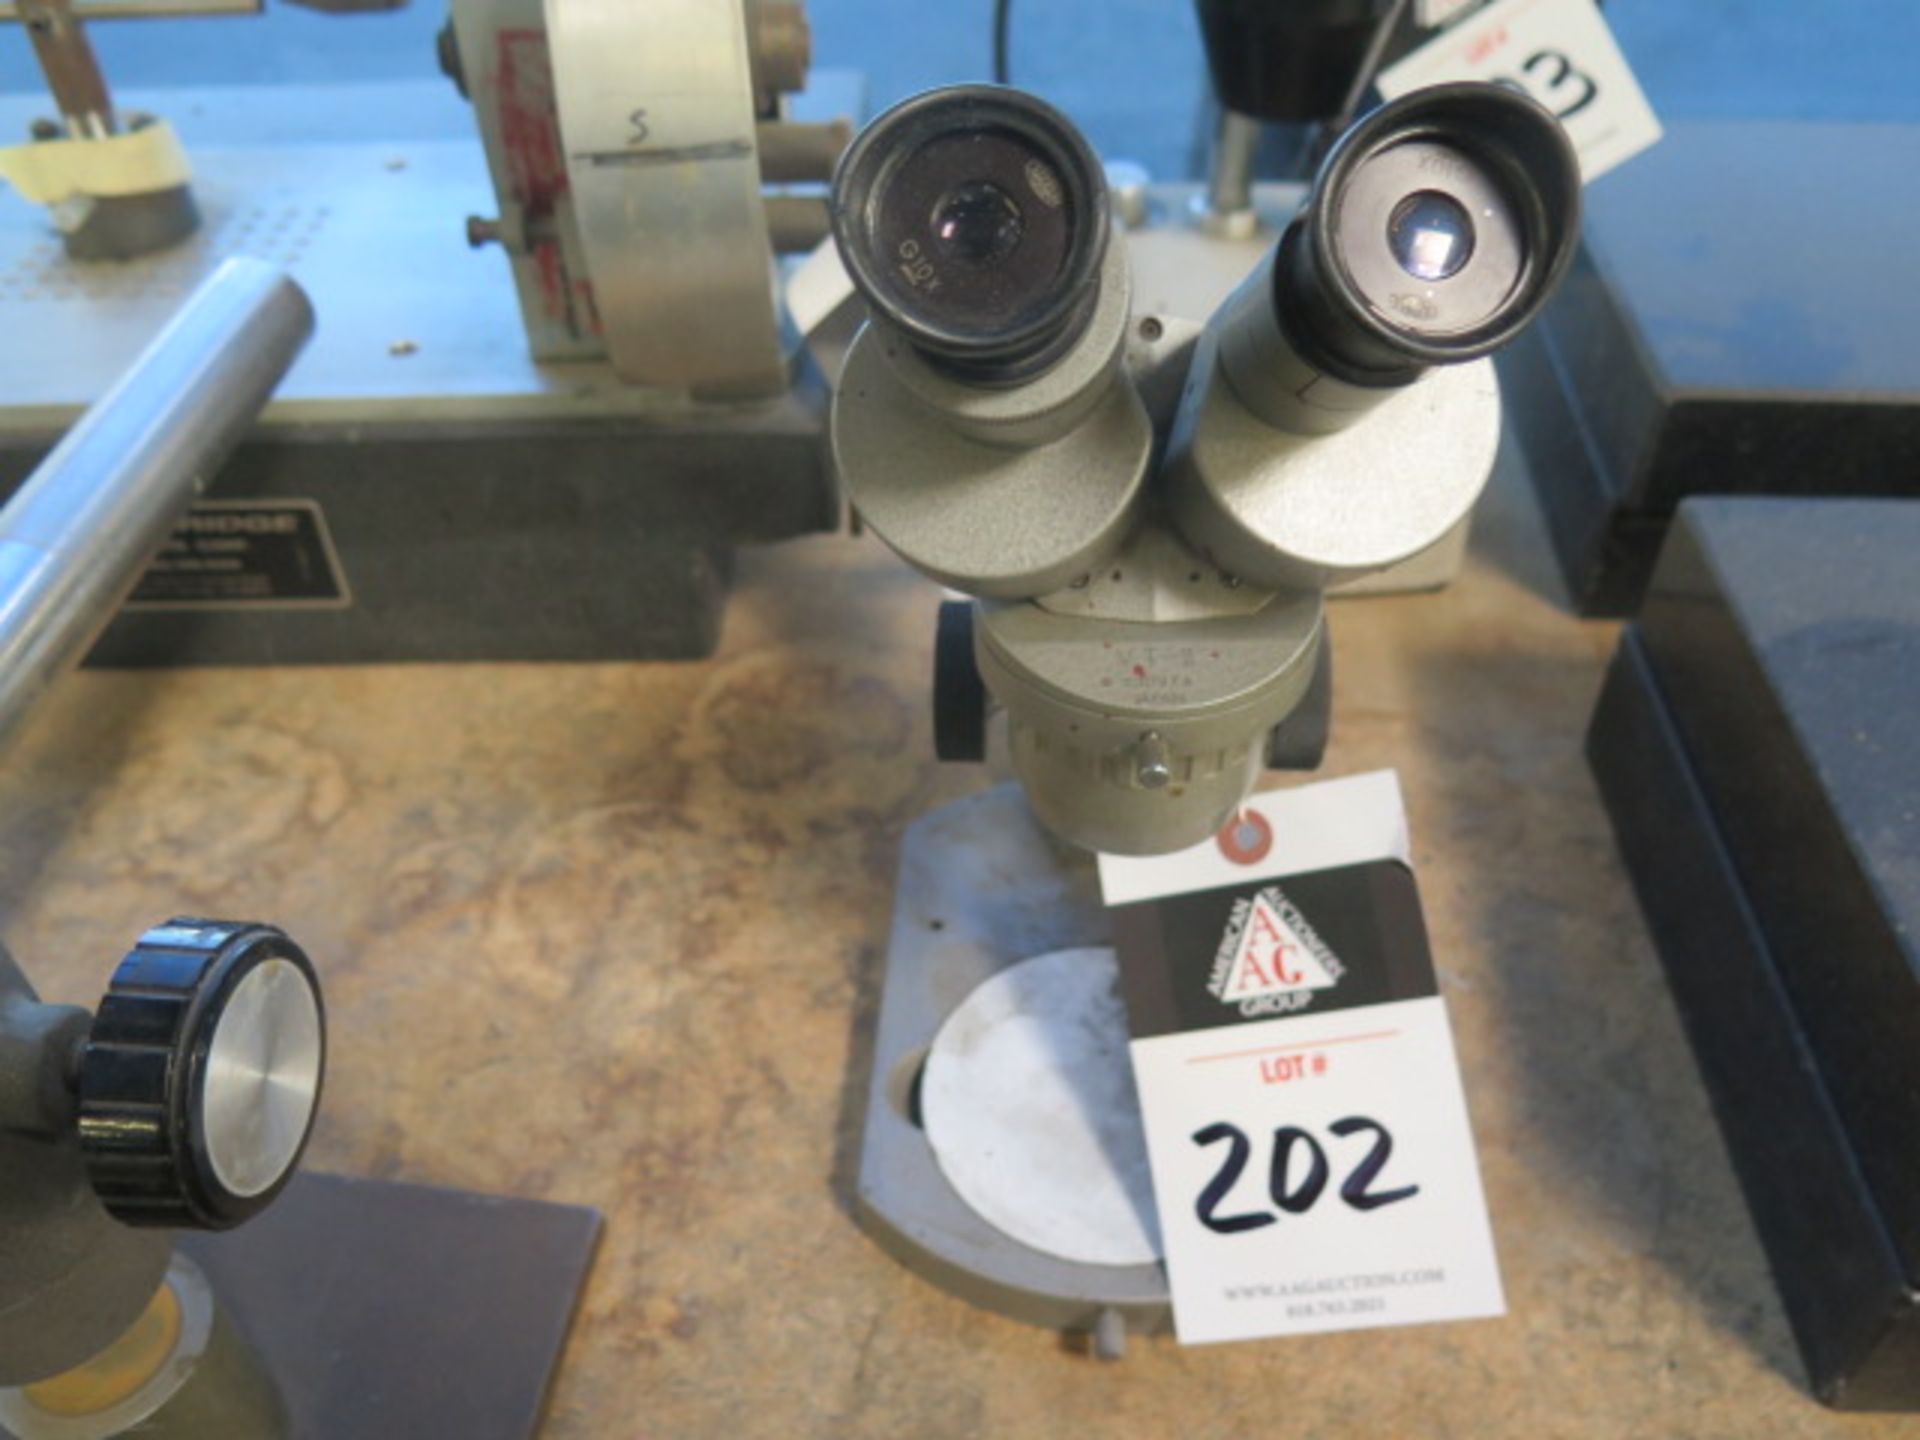 Stereo Microscope (SOLD AS-IS - NO WARRANTY)